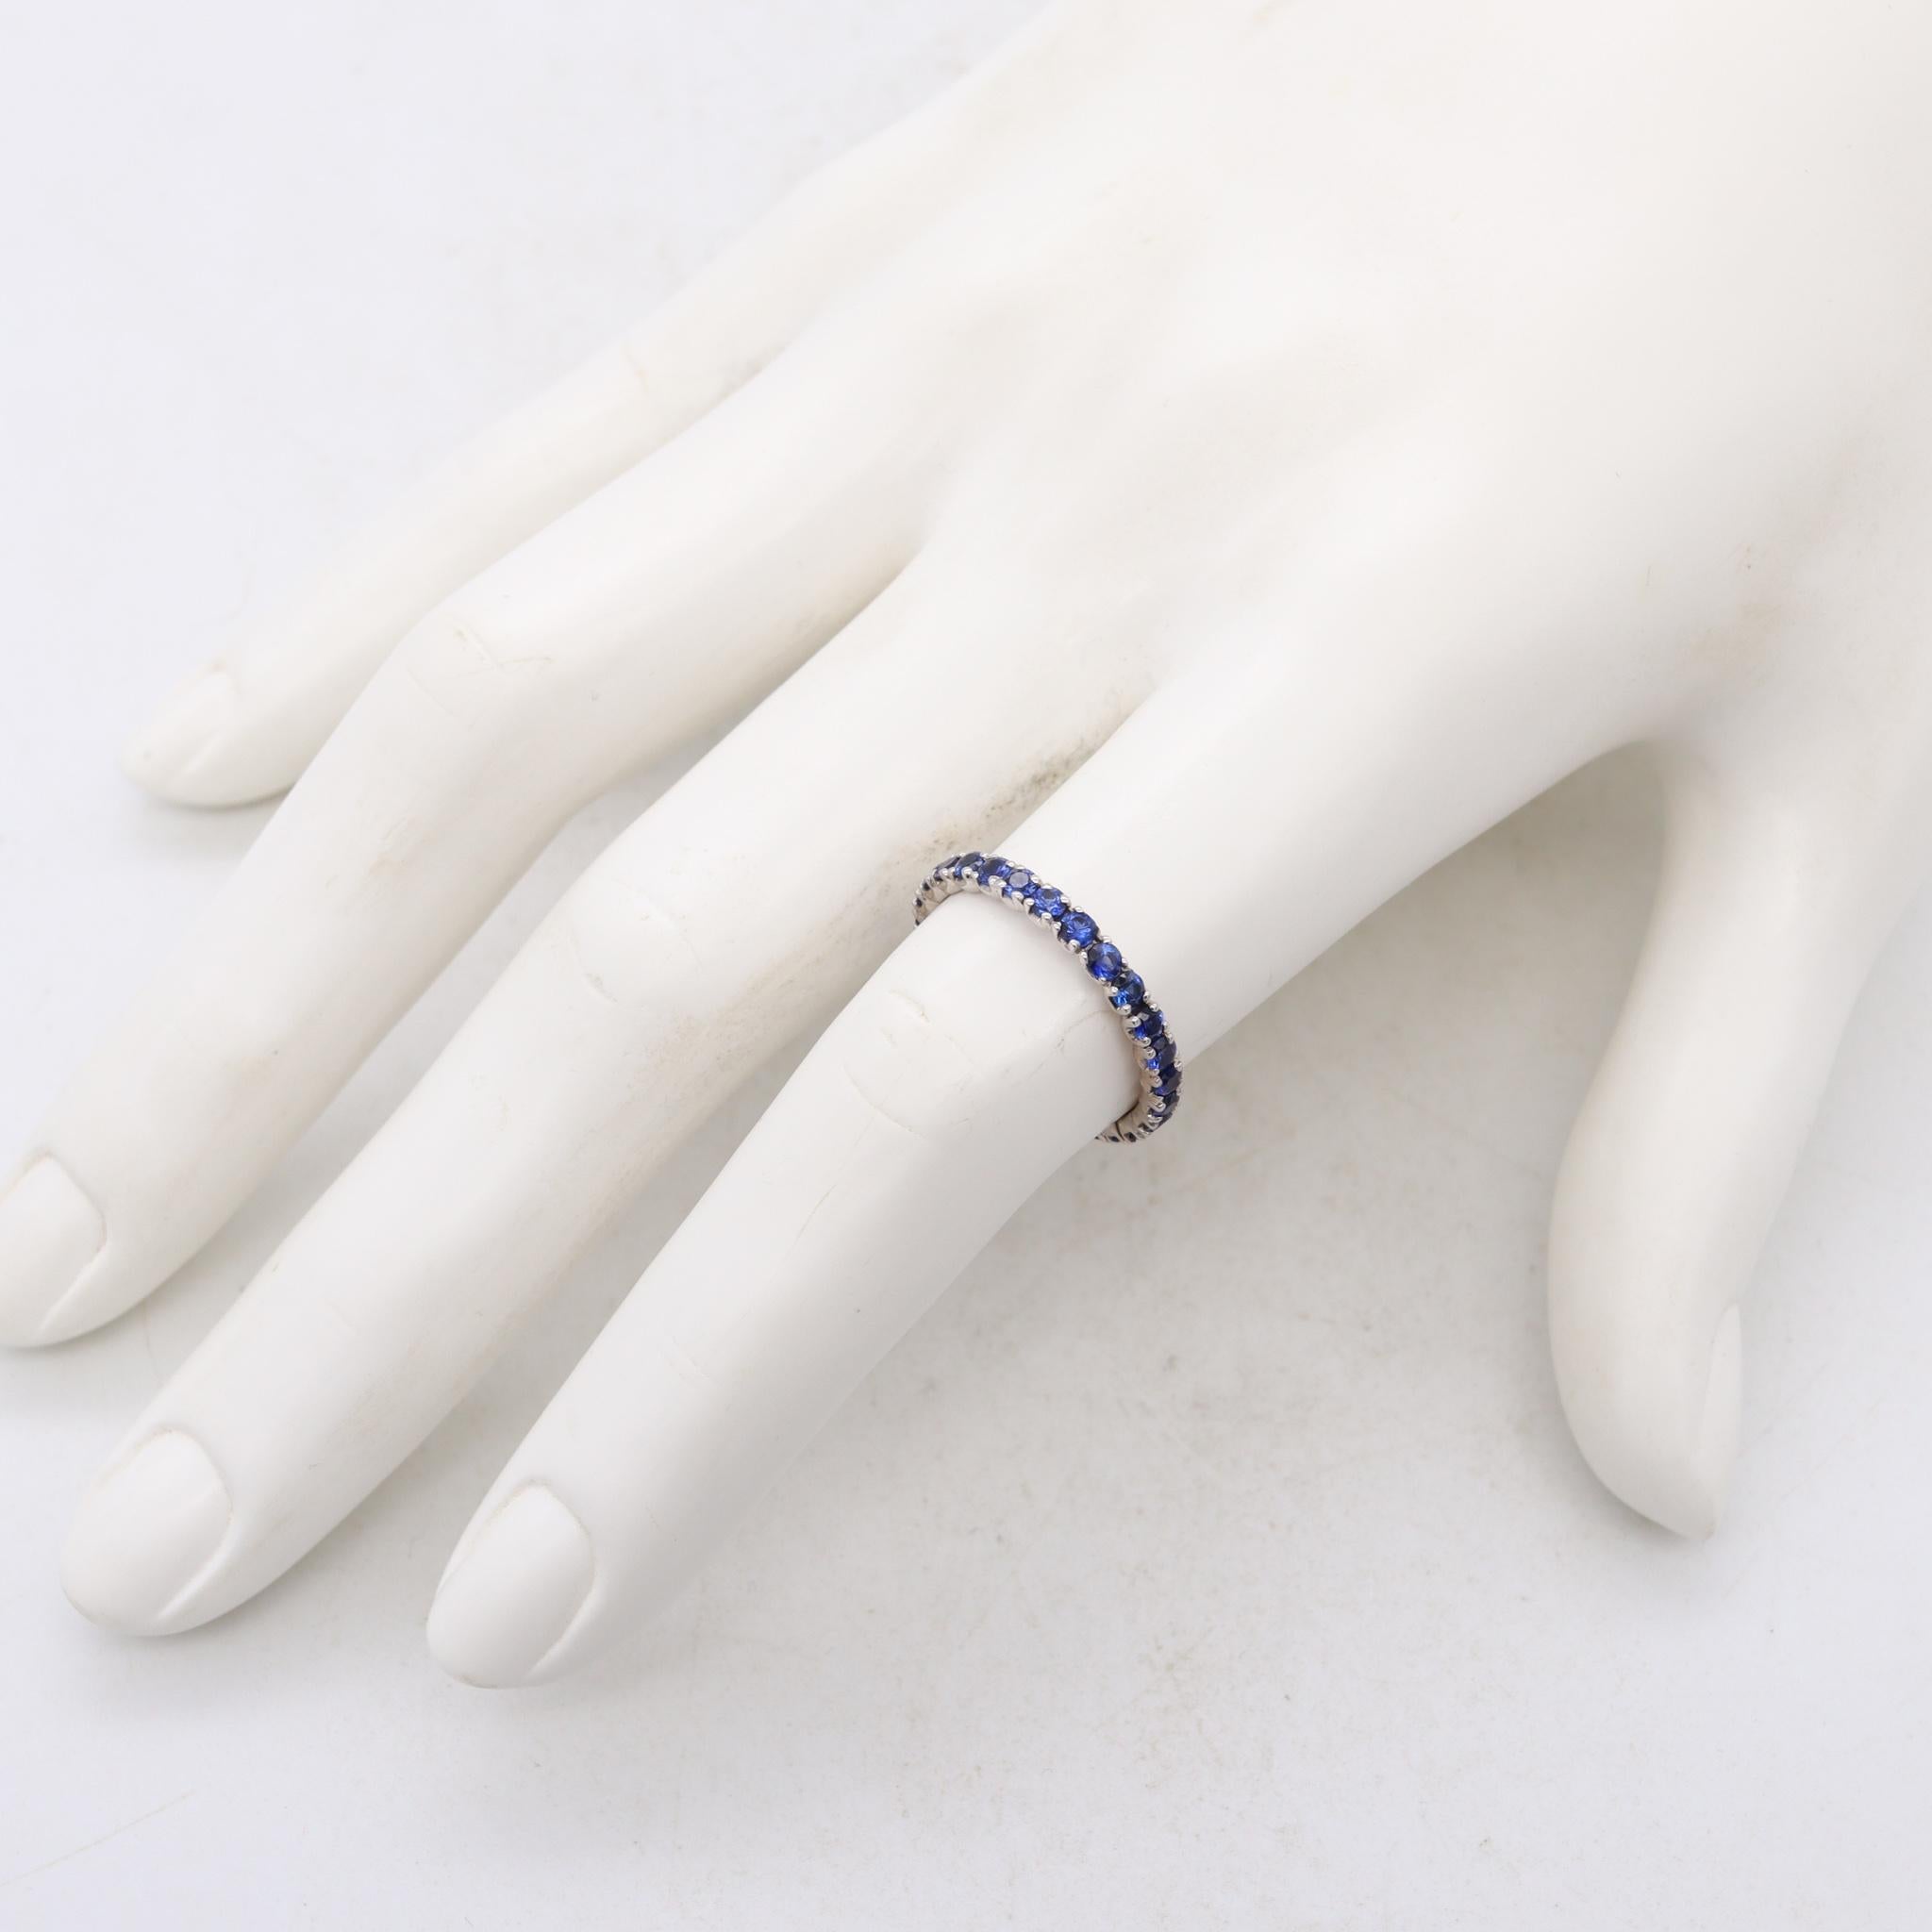 Brilliant Cut Eternity Ring Band in 18kt White Gold with 1.35 Cts in Ceylon Blue Sapphires